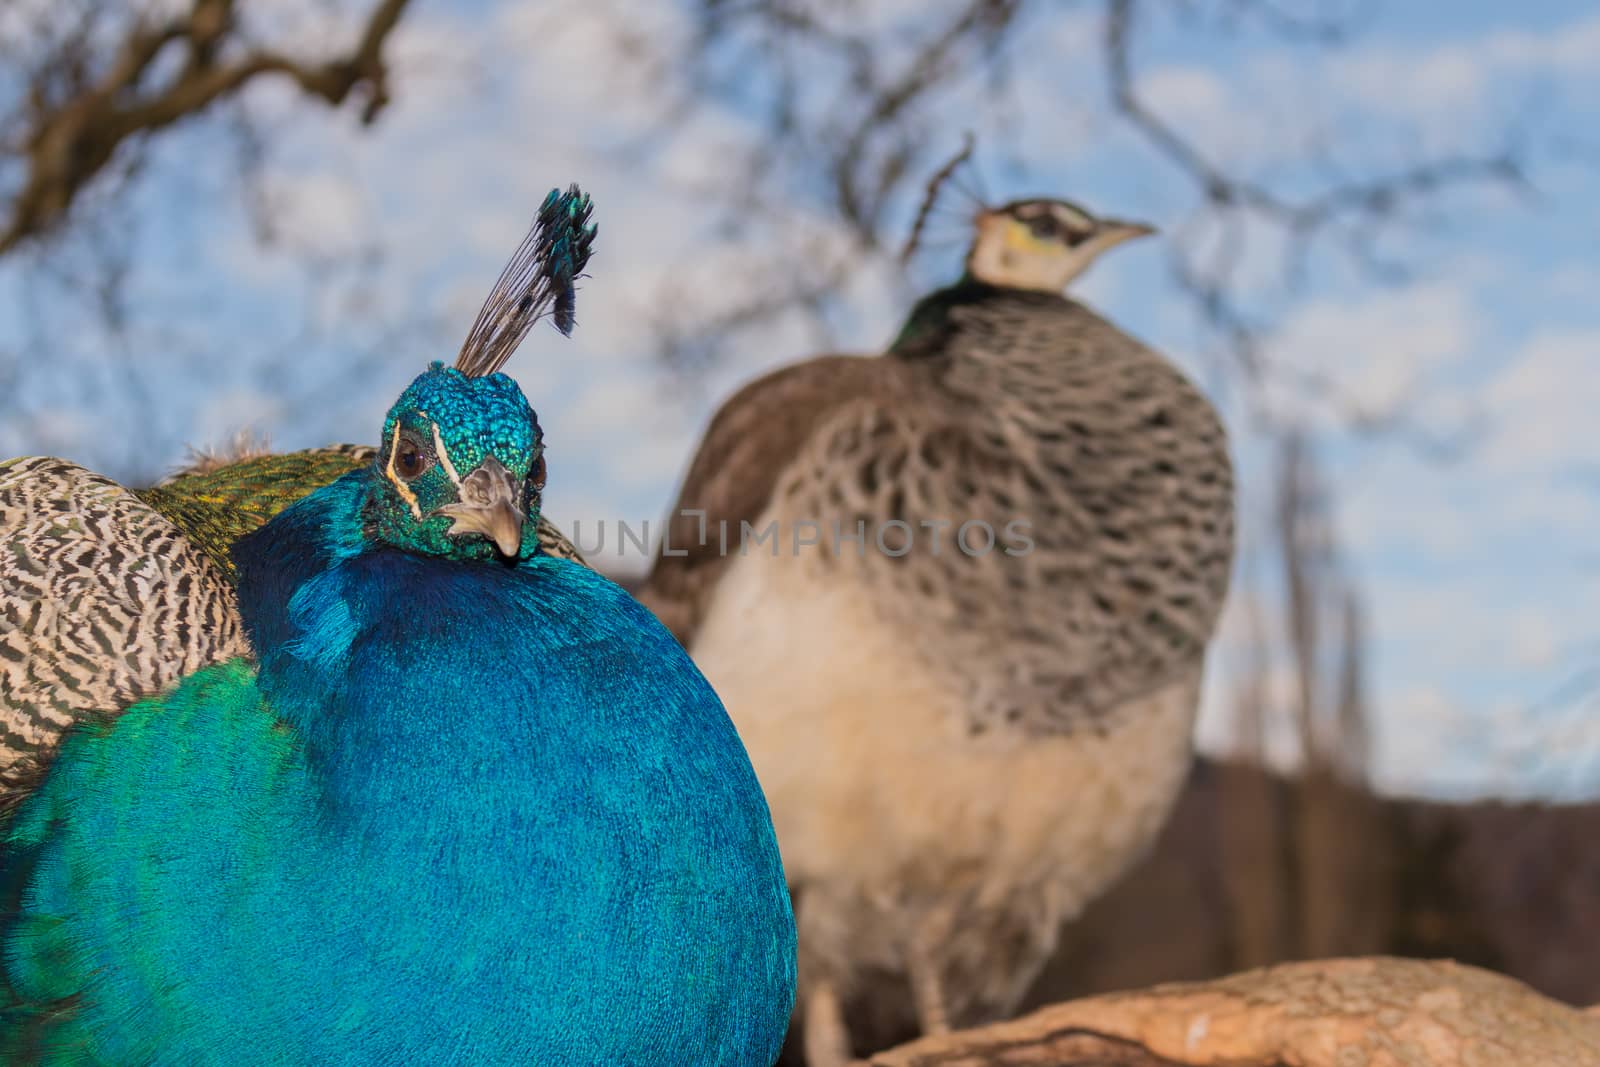 Couple of peacock,front sharp blurred background